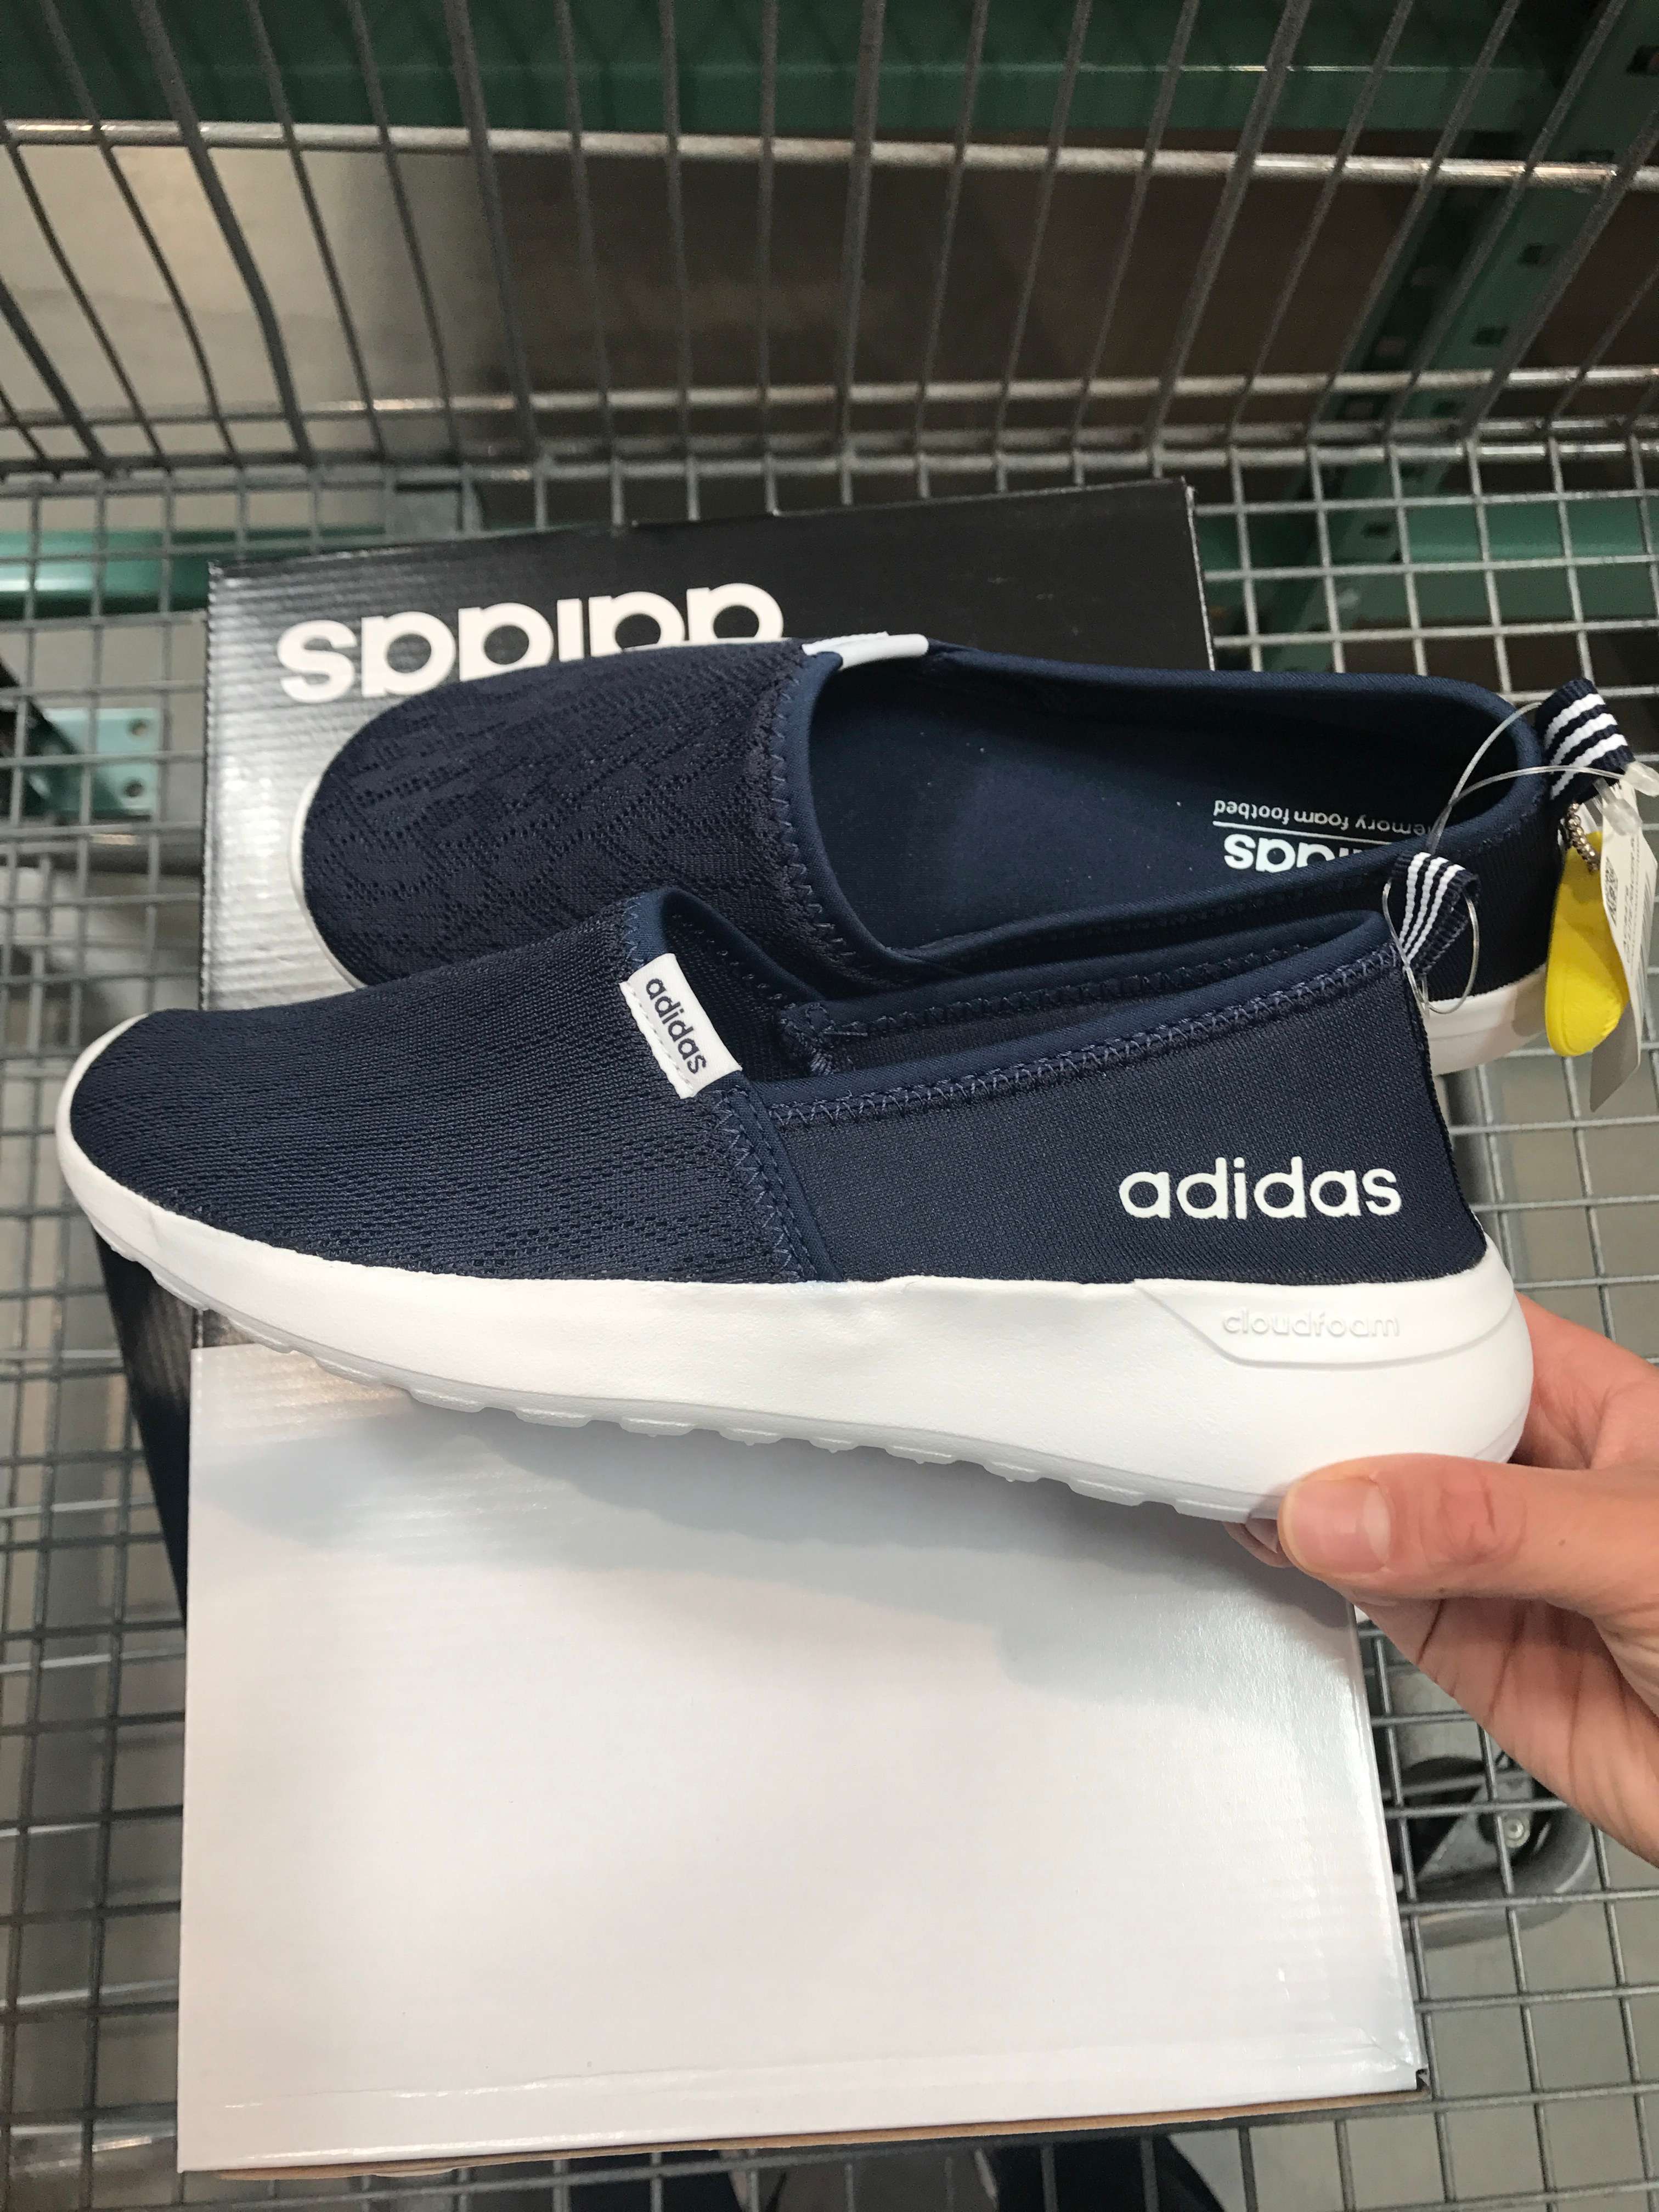 Coche competencia Inspiración MUST BUY! Adidas Ladies Neo Slip On Shoes Super soft Super Light New  Without Box | eBay